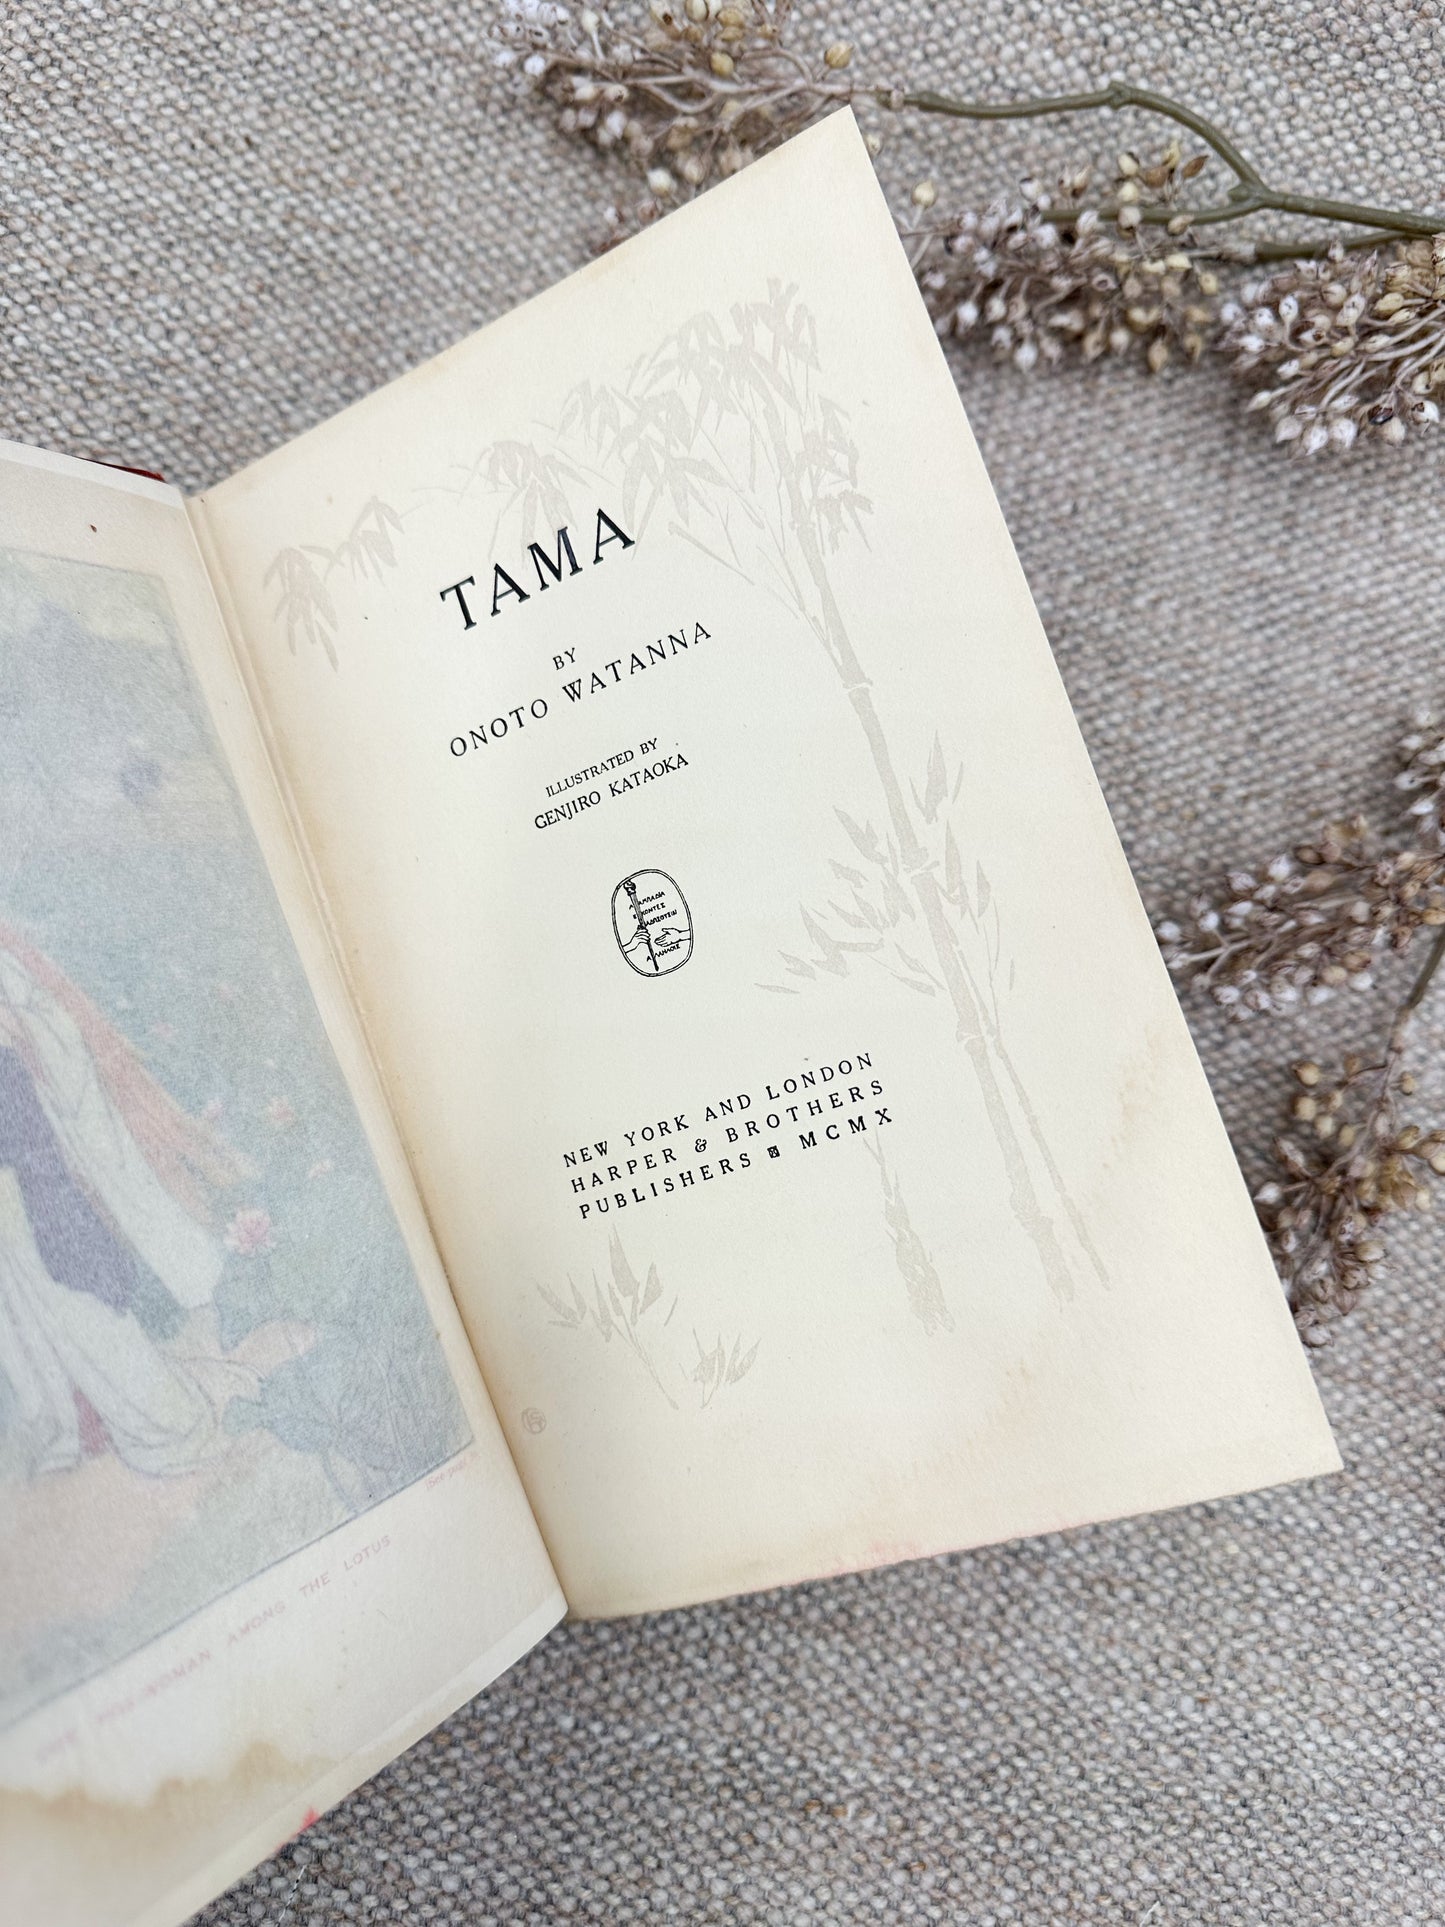 Tama by Onoto Watanna- Every Page Illustrated!